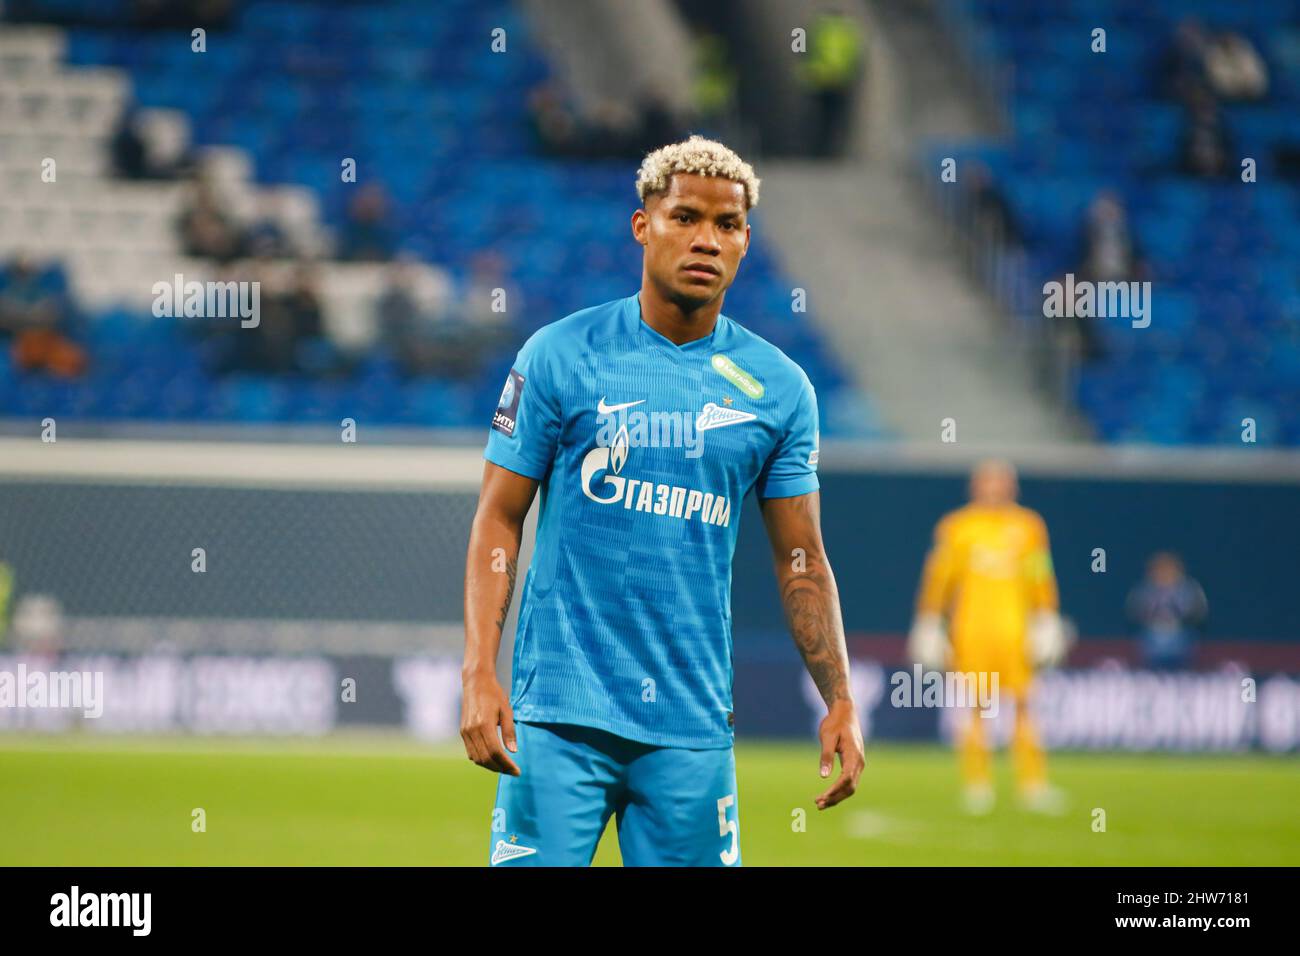 Saint Petersburg, Russia. 03rd Mar, 2022. Wilmar Henrique Barrios Teran, commonly known as Wilmar Barrios (No.9) of Zenit seen during the Russian Cup football match between Zenit Saint Petersburg and Kamaz Naberezhnye Chelny at Gazprom Arena. Final score; Zenit 6:0 Kamaz. (Photo by Maksim Konstantinov/SOPA Images/Sipa USA) Credit: Sipa USA/Alamy Live News Stock Photo